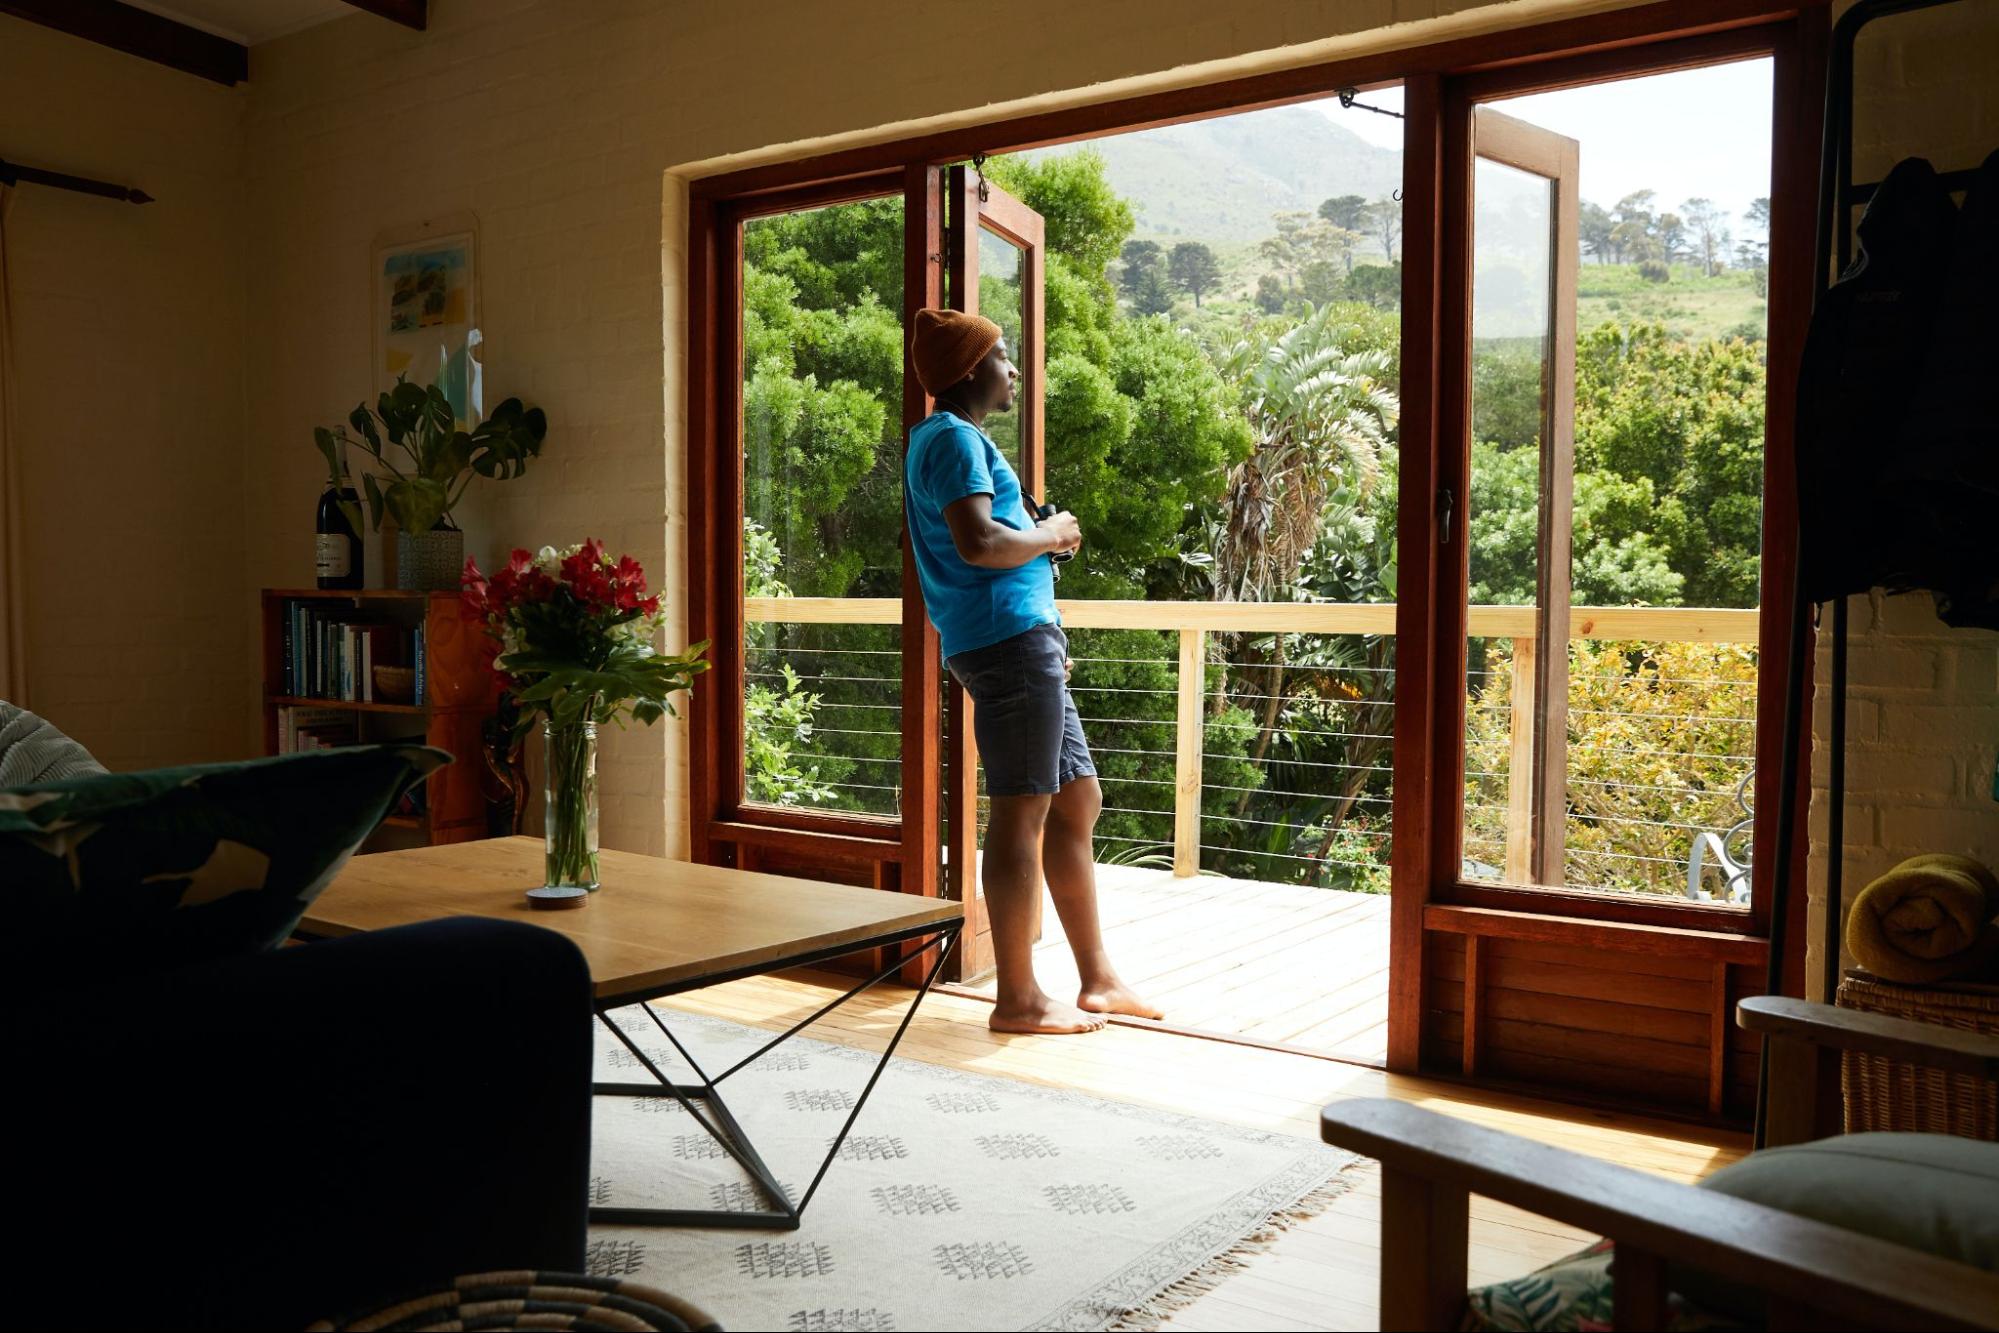 Person in vacation house looking out window